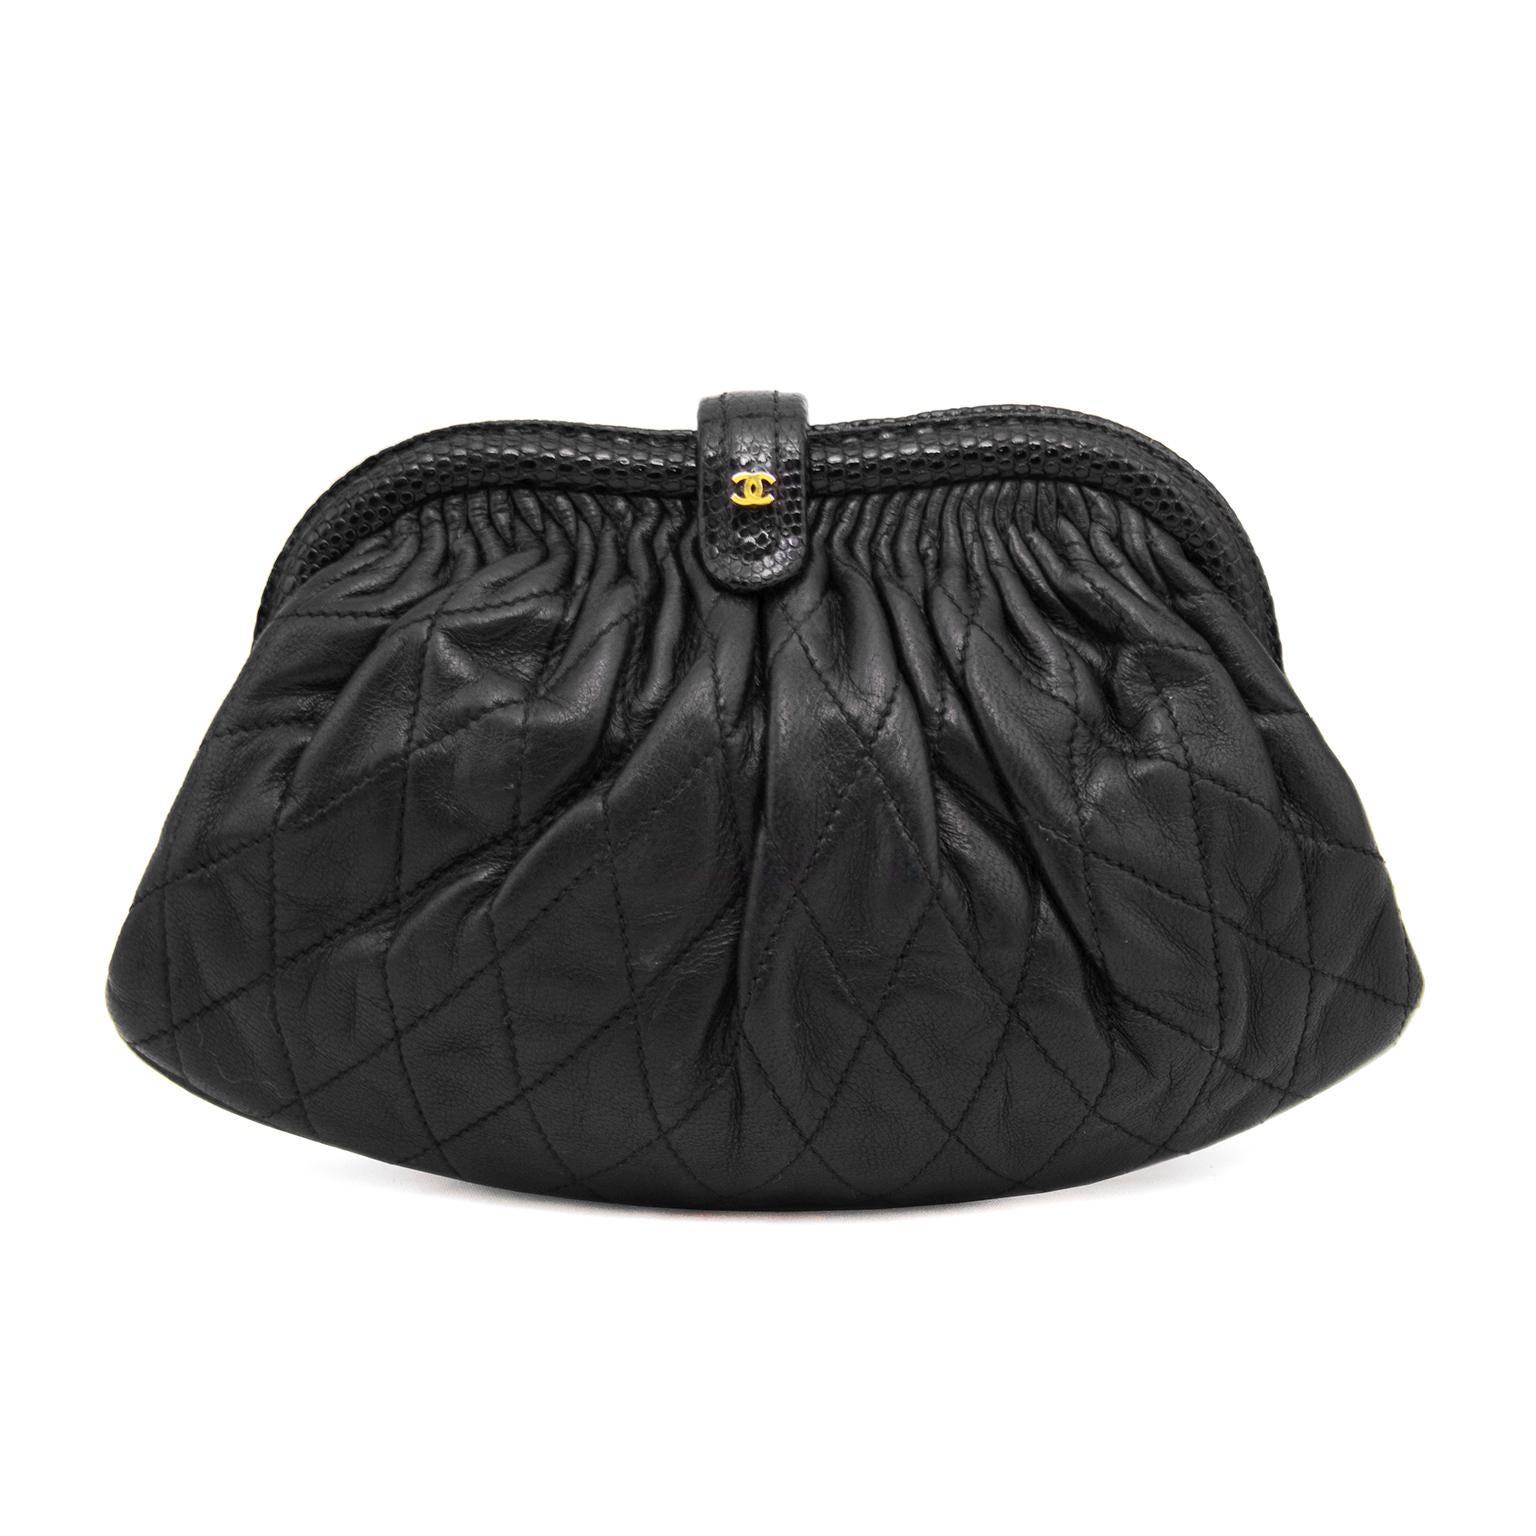 Classic framed style Chanel evening bag with long tubular chain strap. Black quilted leather with some pleating at the top of the frame and black  piping. A black skin covered top snap closure allows for easy access with CC logo on the front.